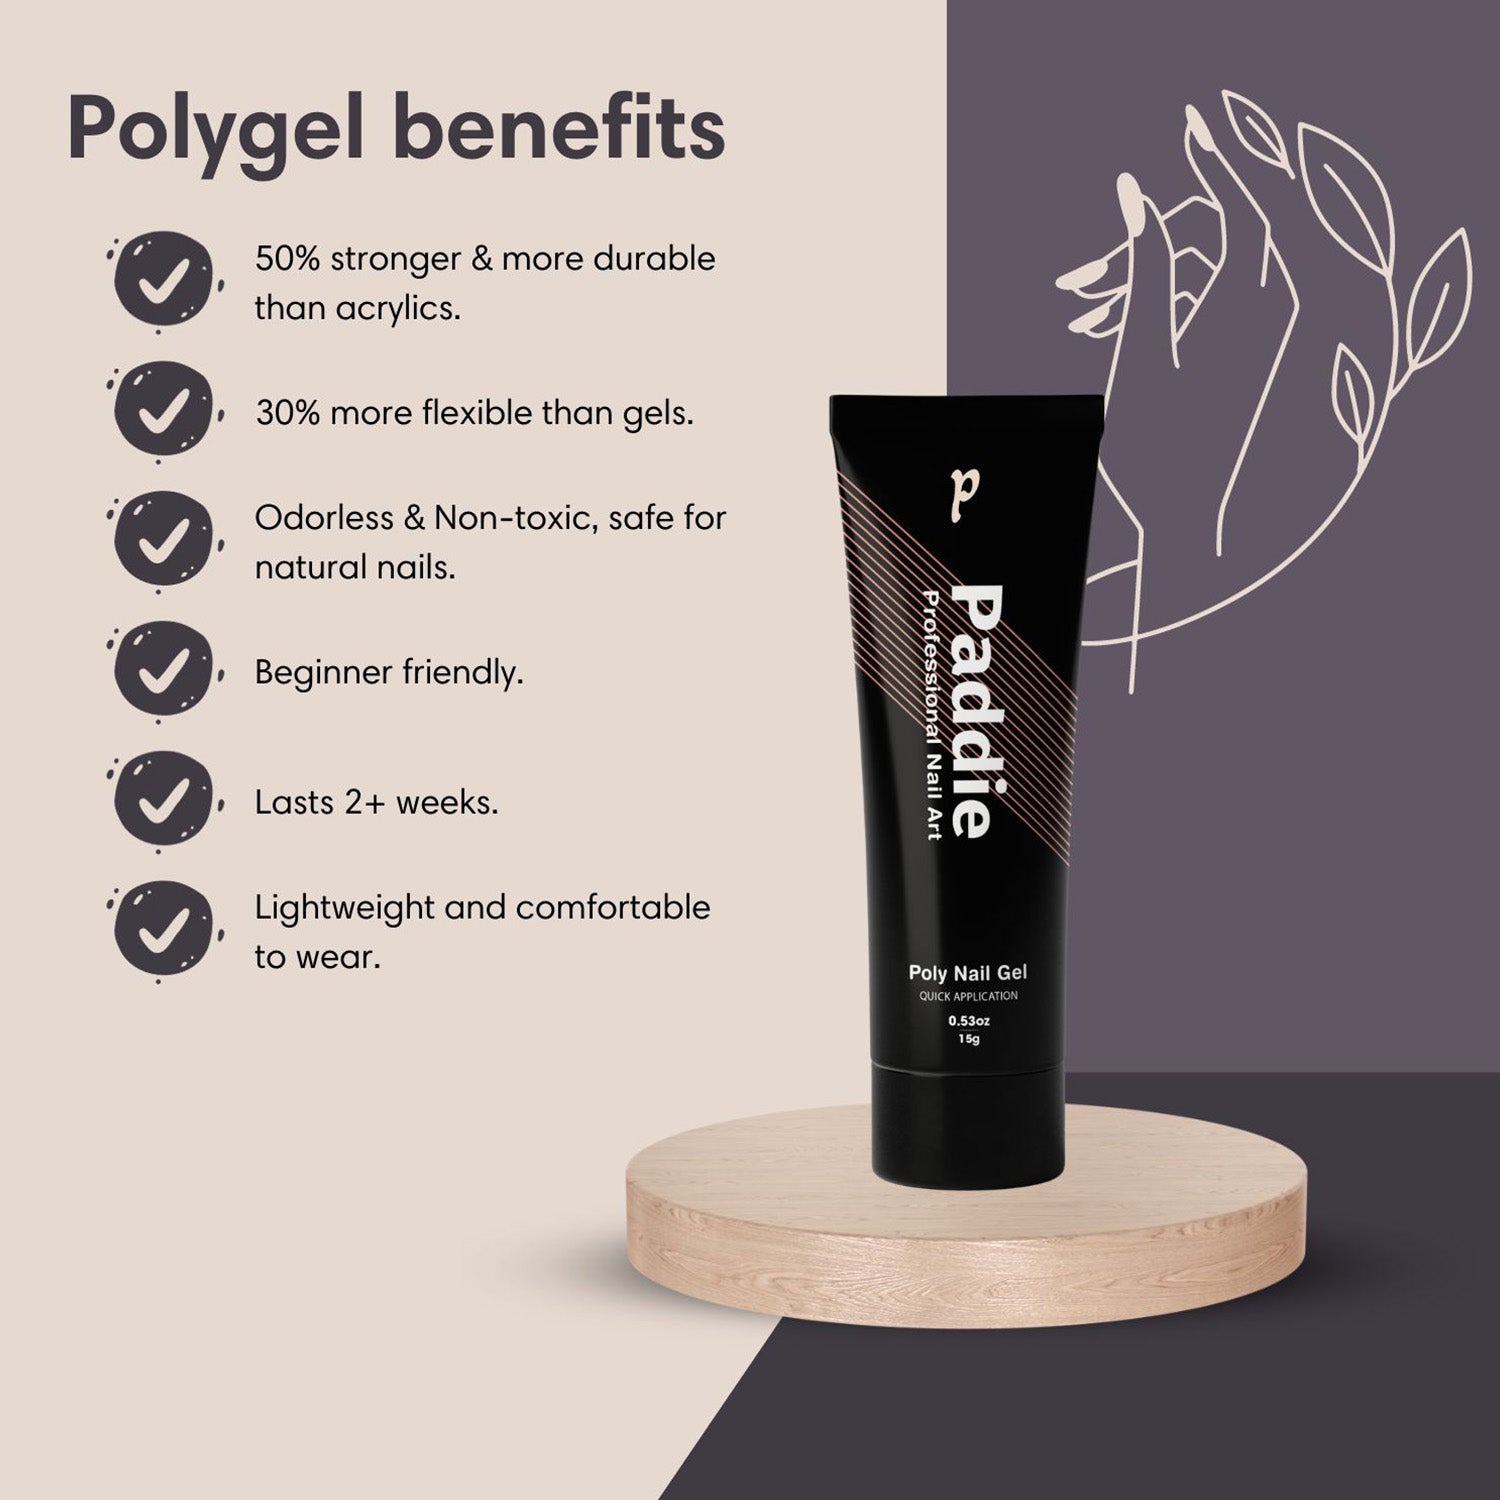 Paddie Nail Polygel is Stronger, Flexible, Odorless, Easy to Use, Long-lasting, and Lightweight.